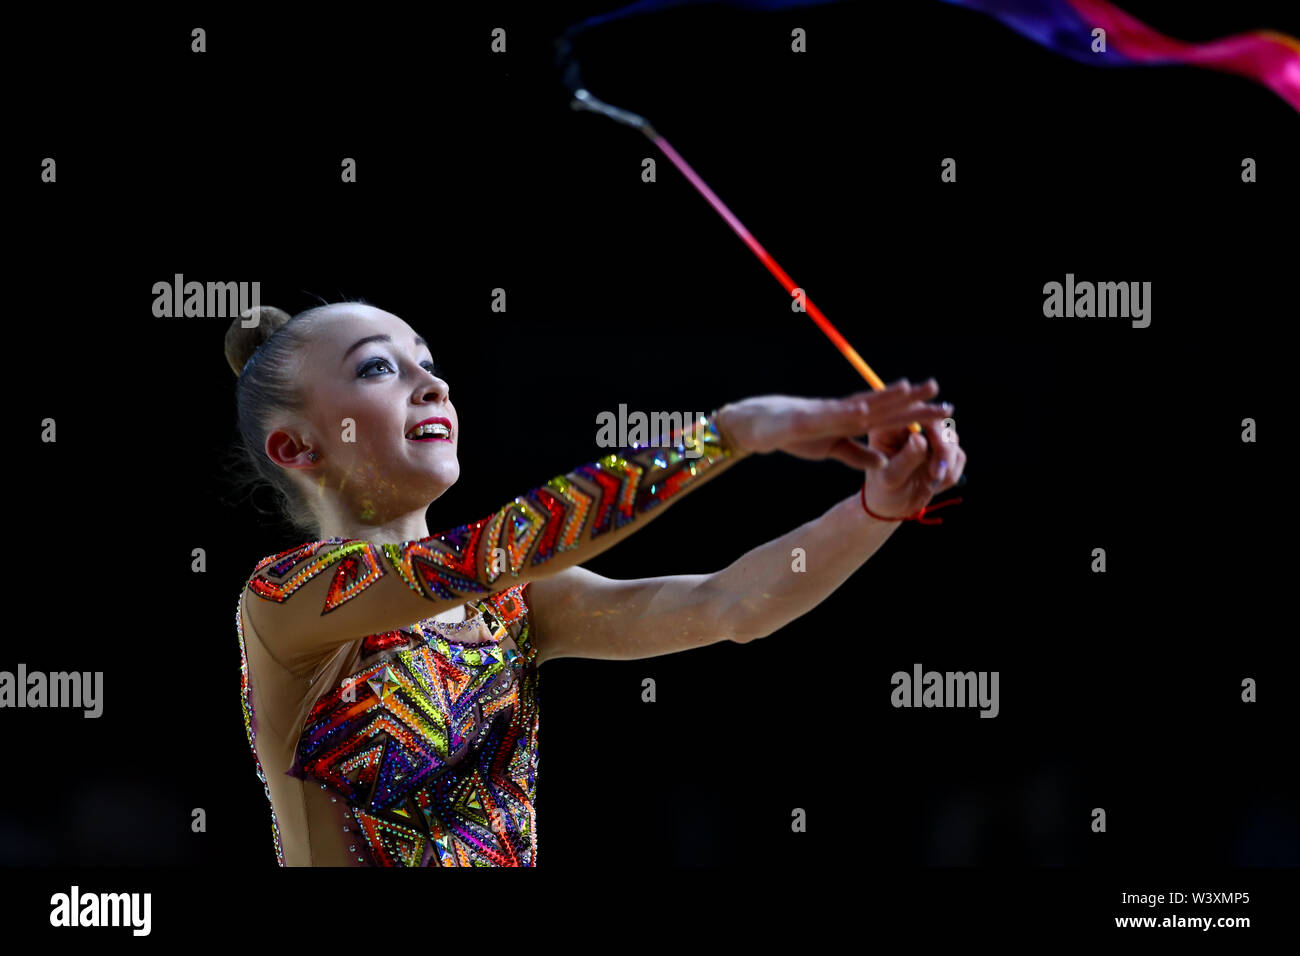 Khrystyna Pohranychna from Ukraine performs her ribbon routine during 2019 Grand Prix de Thiais Stock Photo